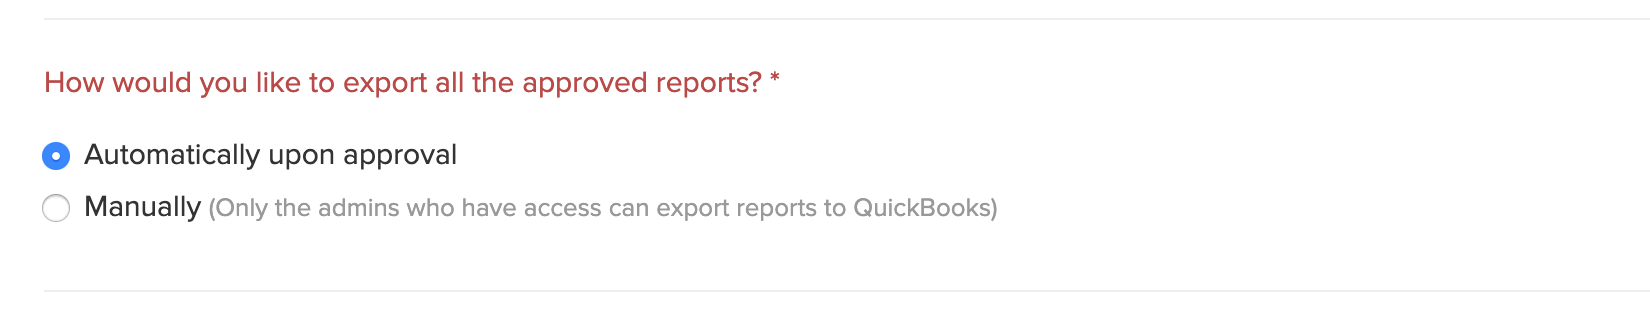 Export reports automatically